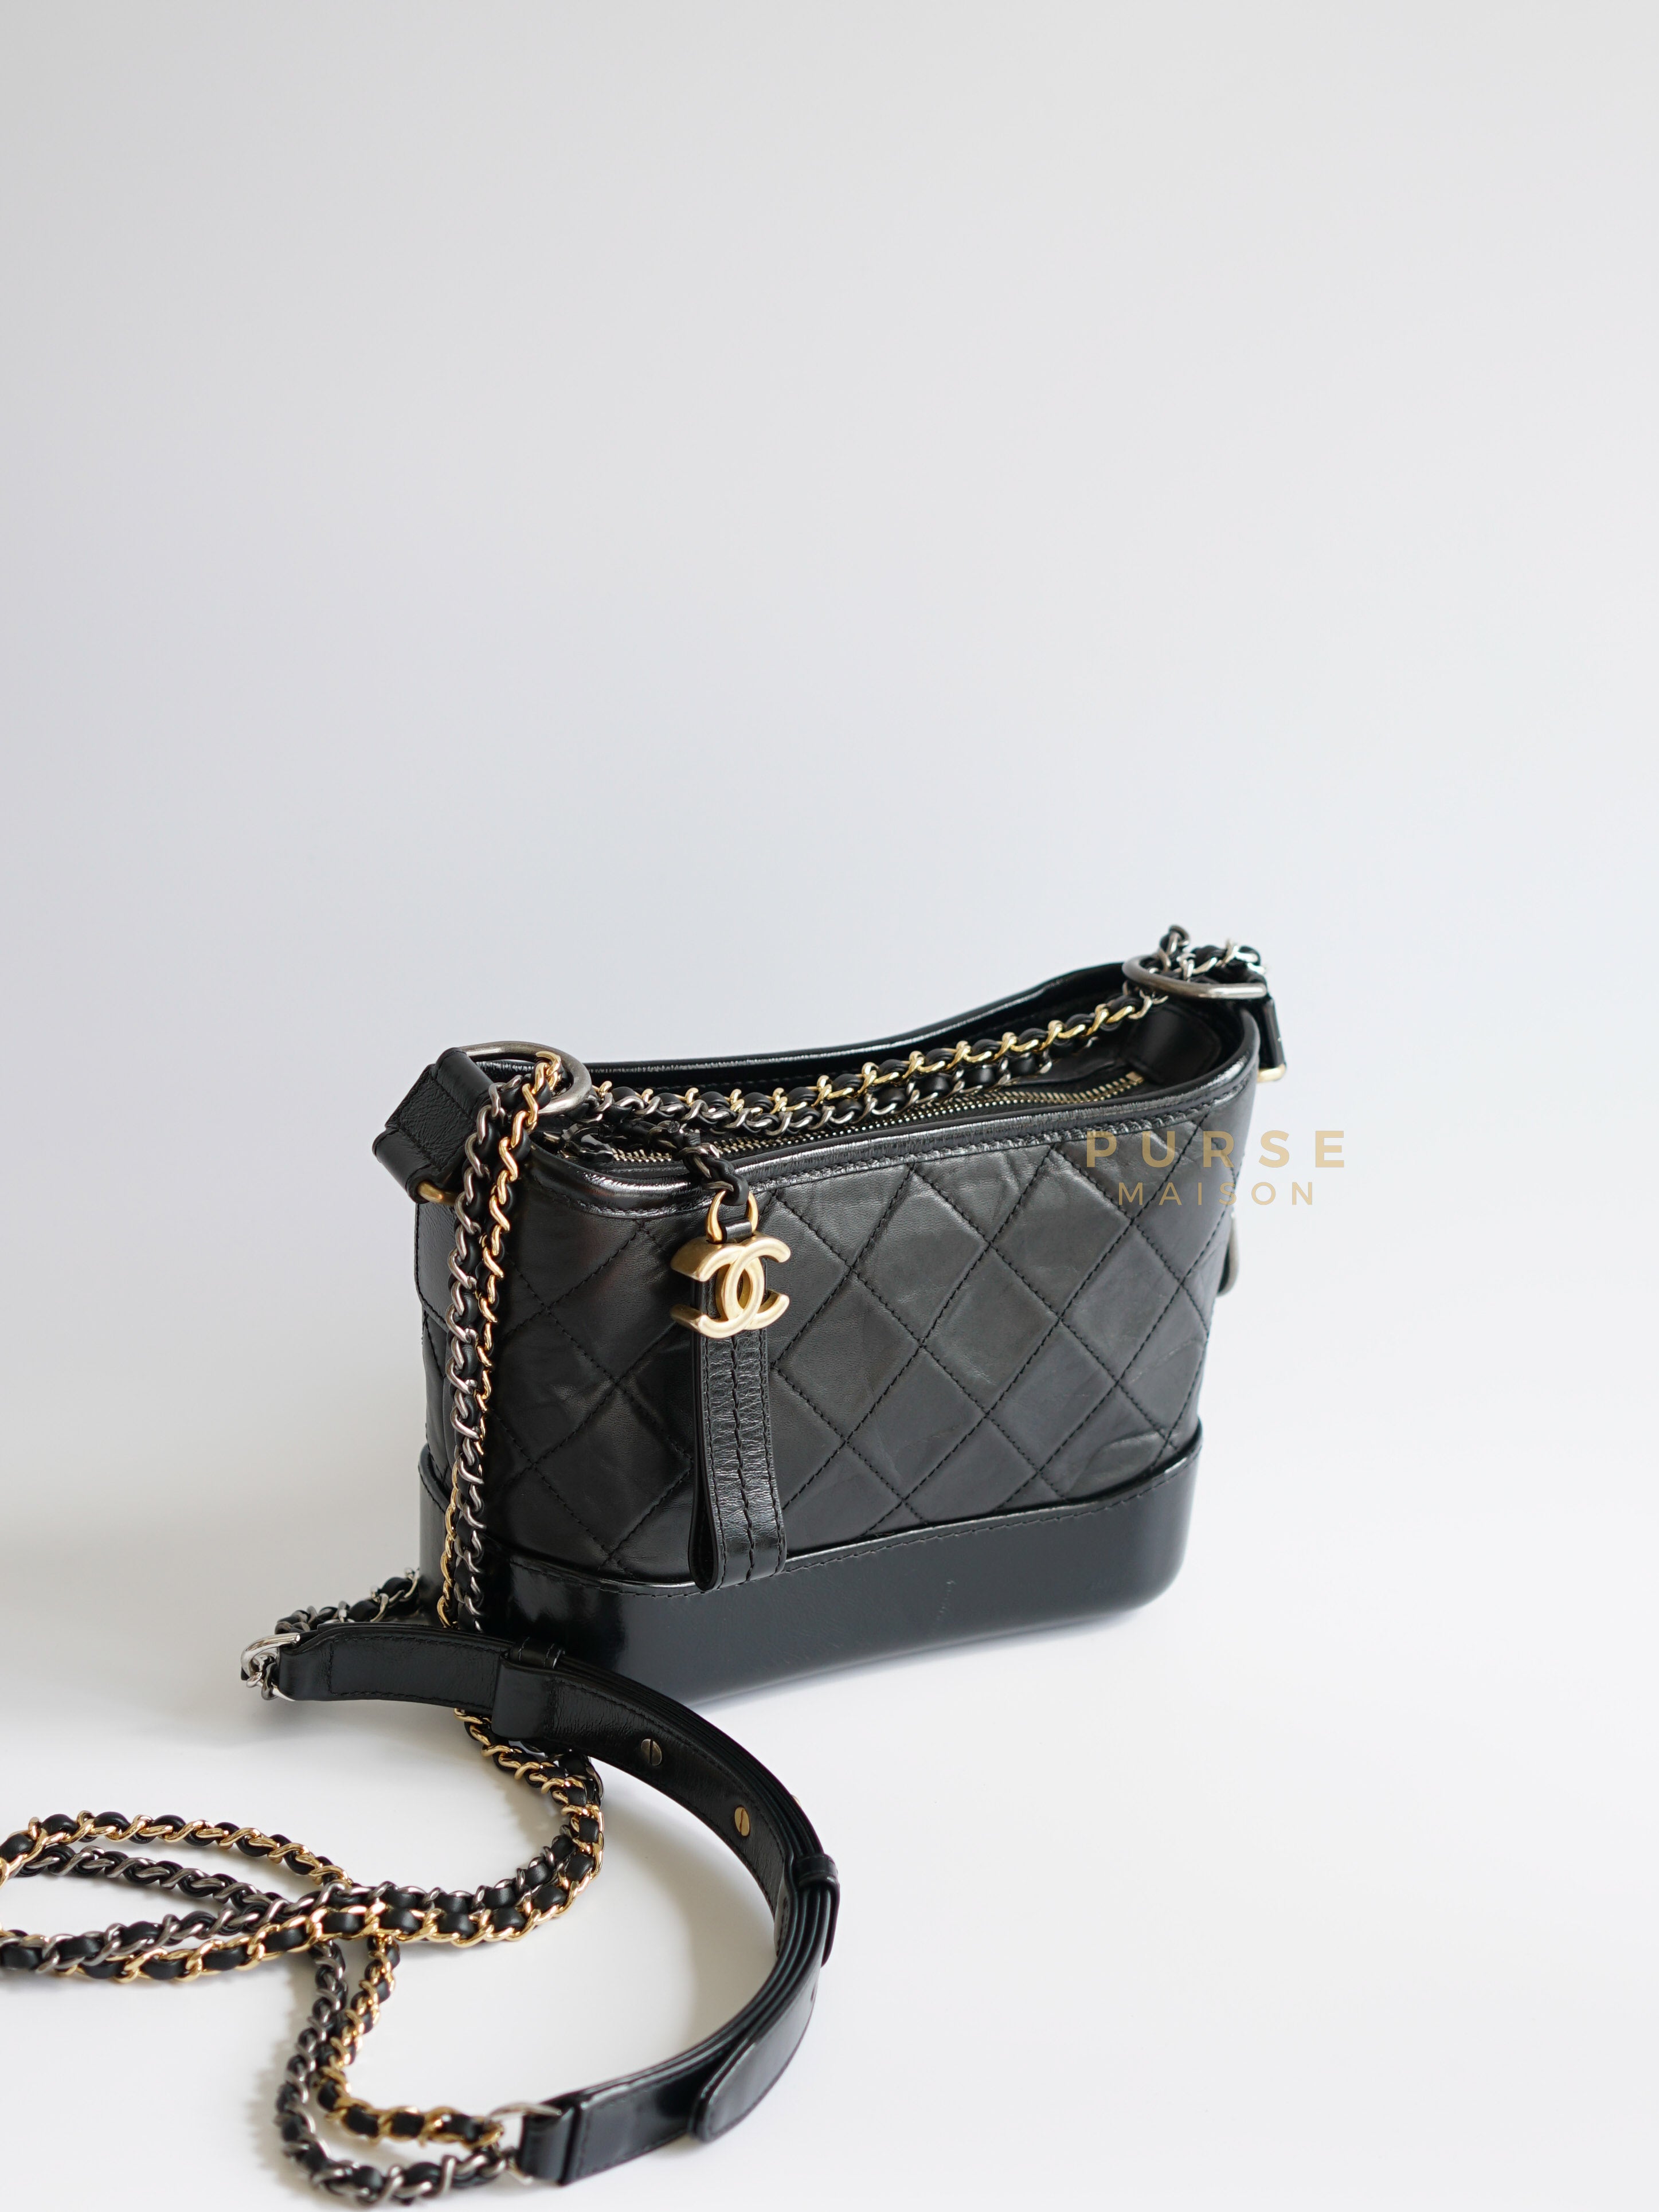 Gabrielle Small Hobo Bag in Black Distressed Calfskin Leather & Mixed Hardware (Series 30) | Purse Maison Luxury Bags Shop